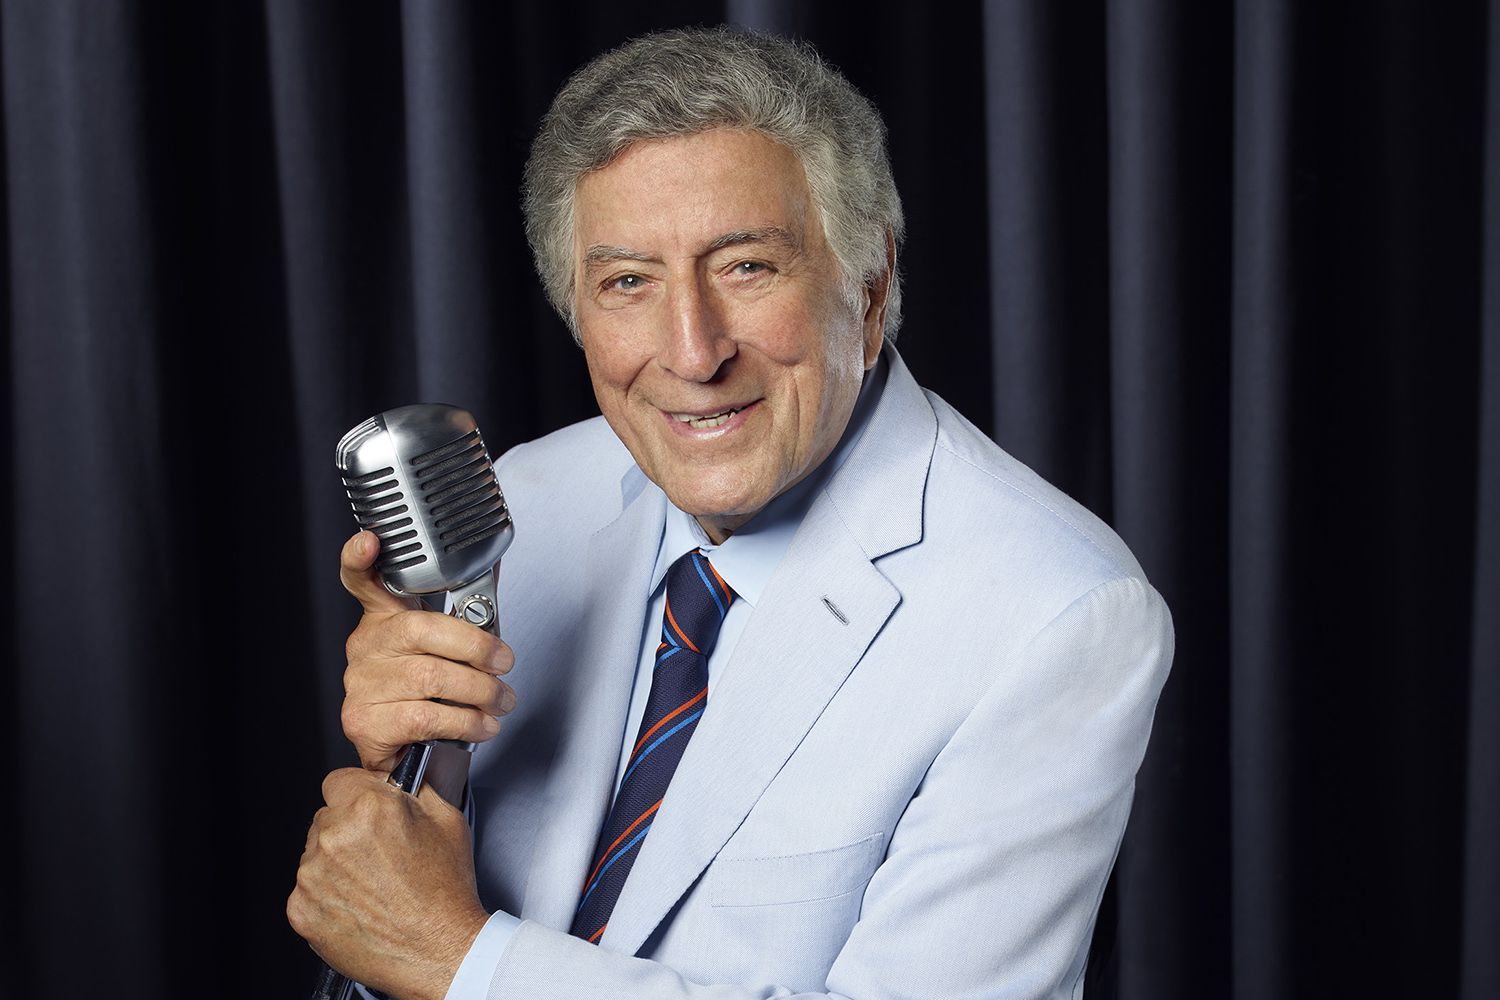 TONY BENNETT CELEBRATES 90: THE BEST IS YET TO COME